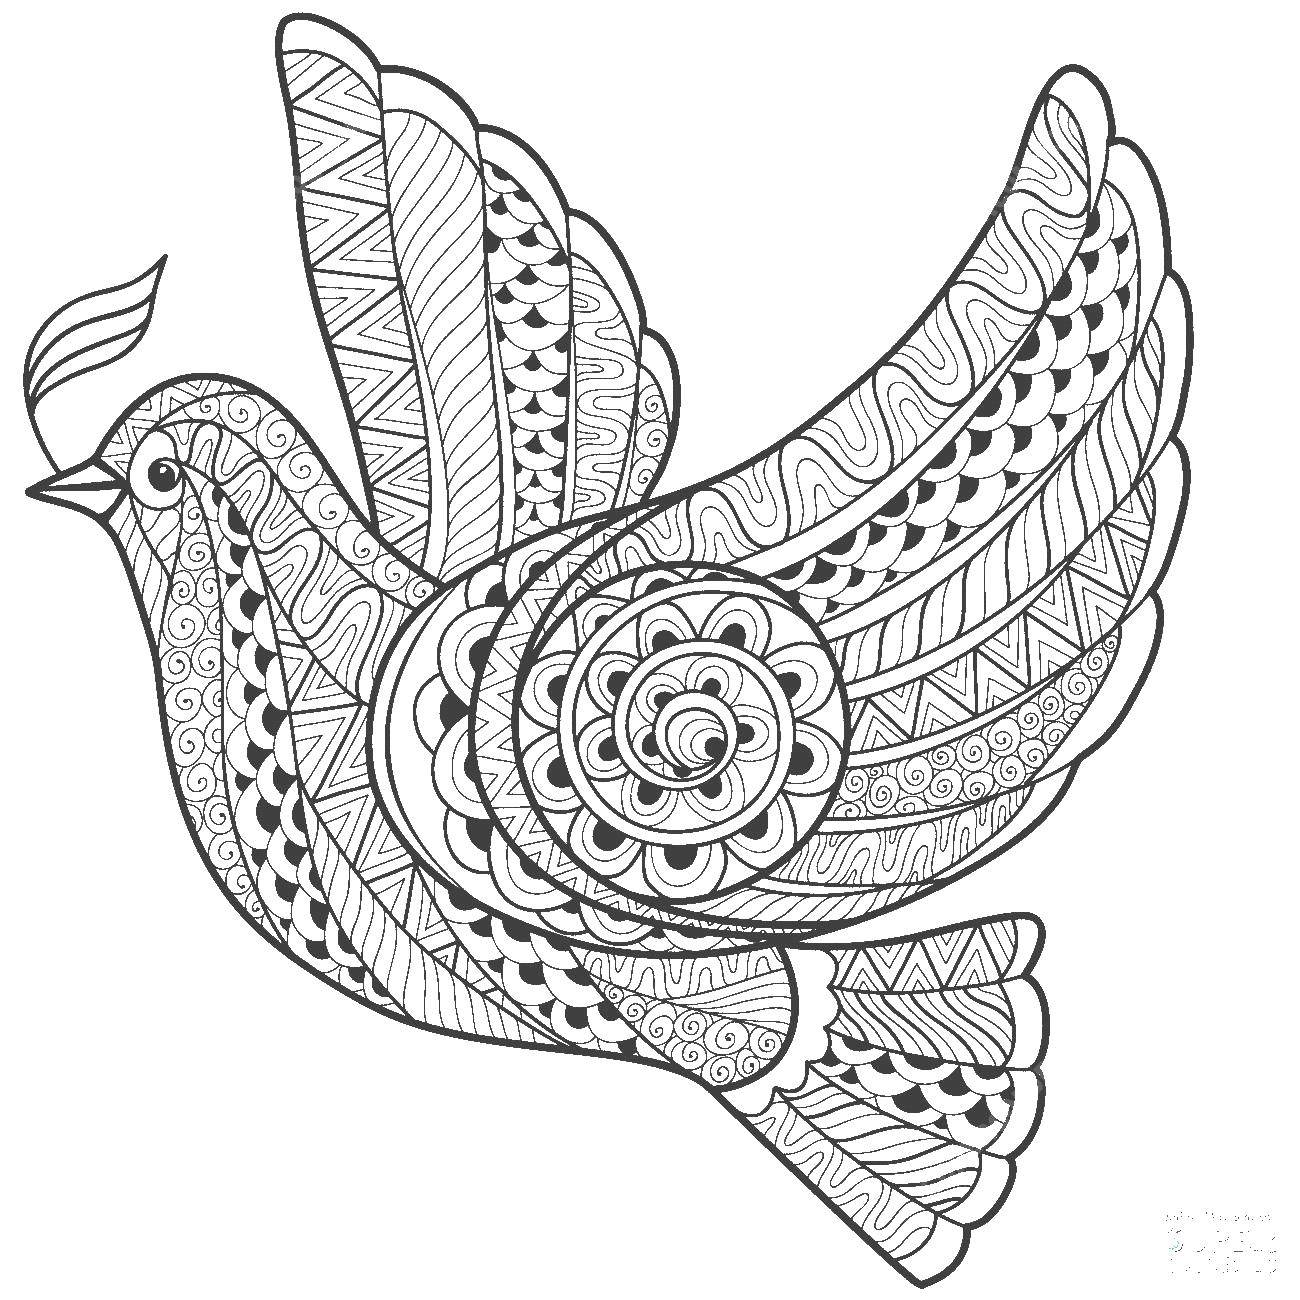 Coloring Patterned dove. Category the dove of peace . Tags:  Patterns, geometric.